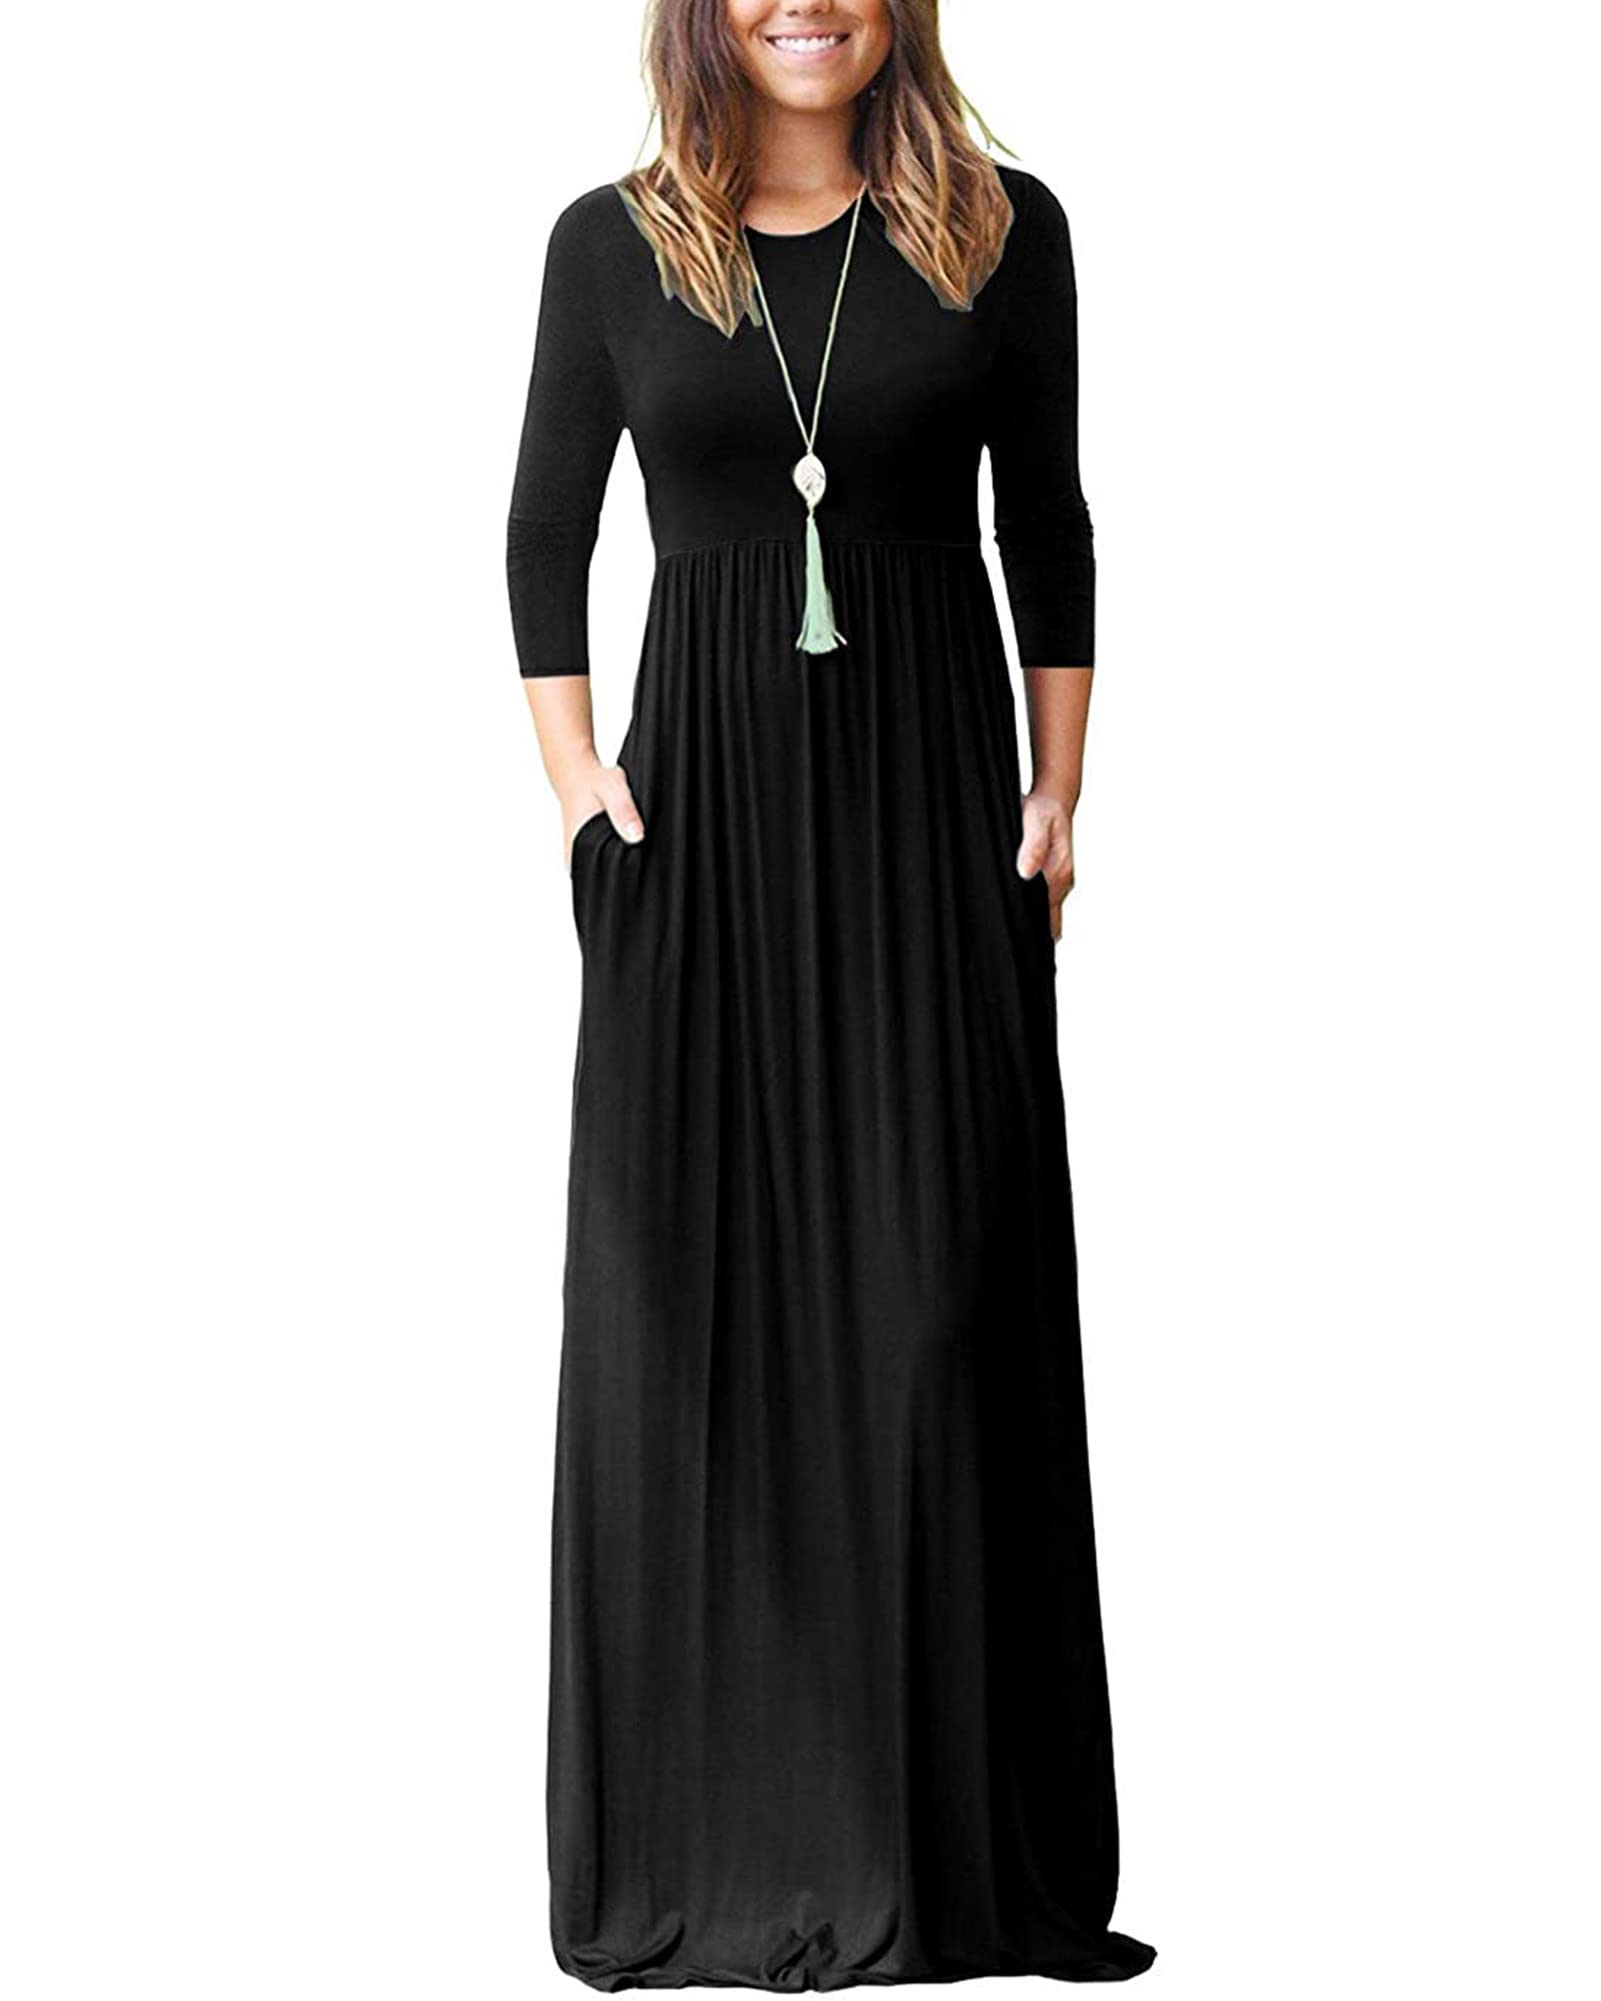 WNEEDU Women's 3/4 Sleeve Loose Casual Long Maxi Dresses with Pockets